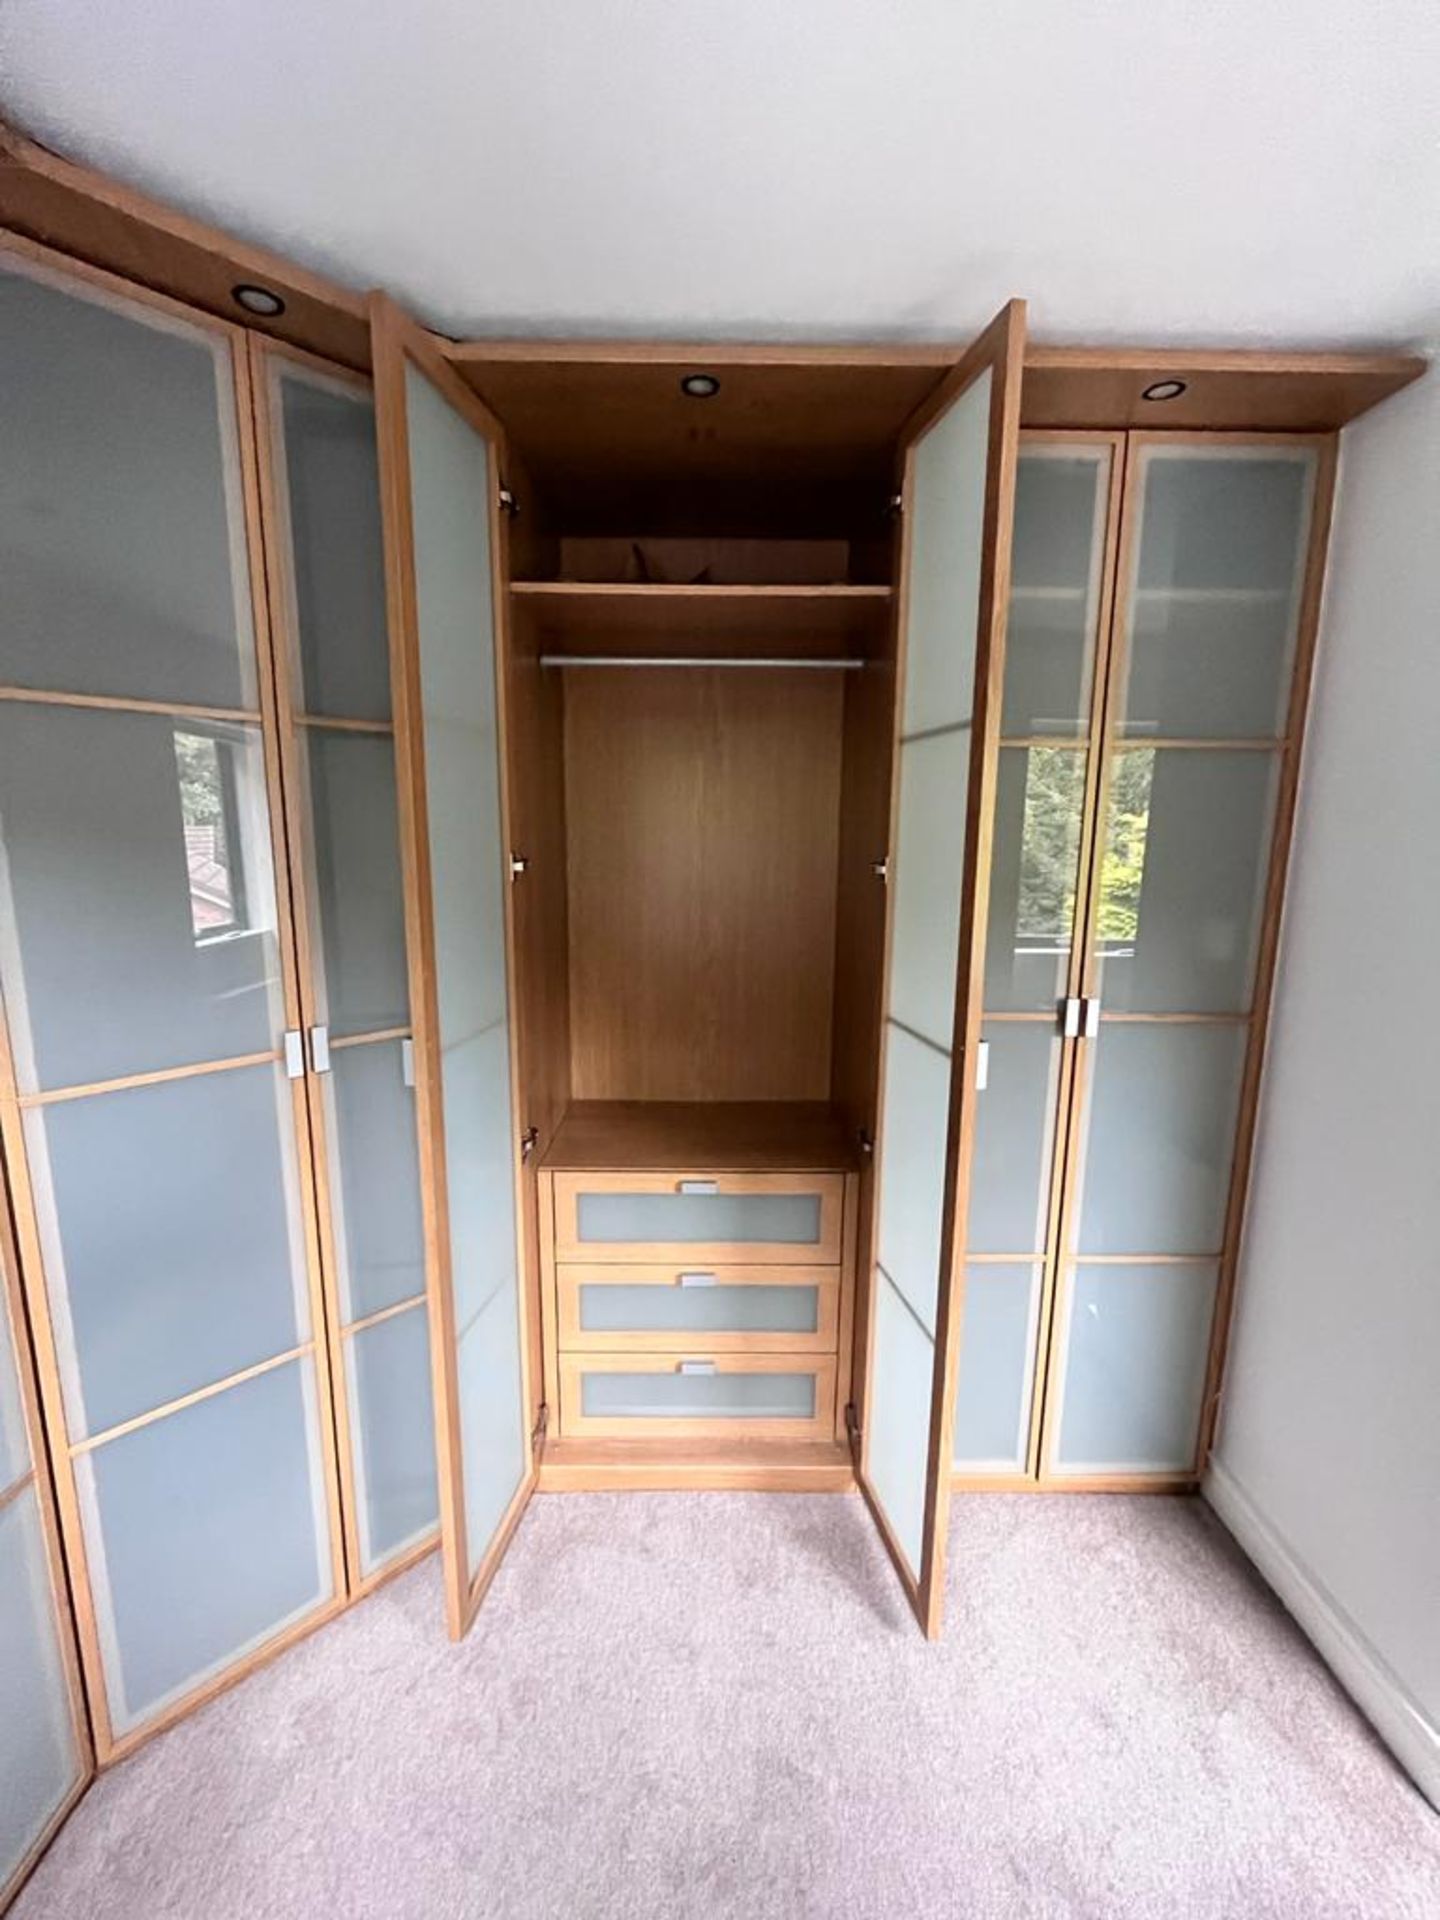 Large Bank Of Bespoke Fitted Master Bedroom Wardrobe Storage With Frosted Glass 8-Door Frontage - - Image 3 of 8